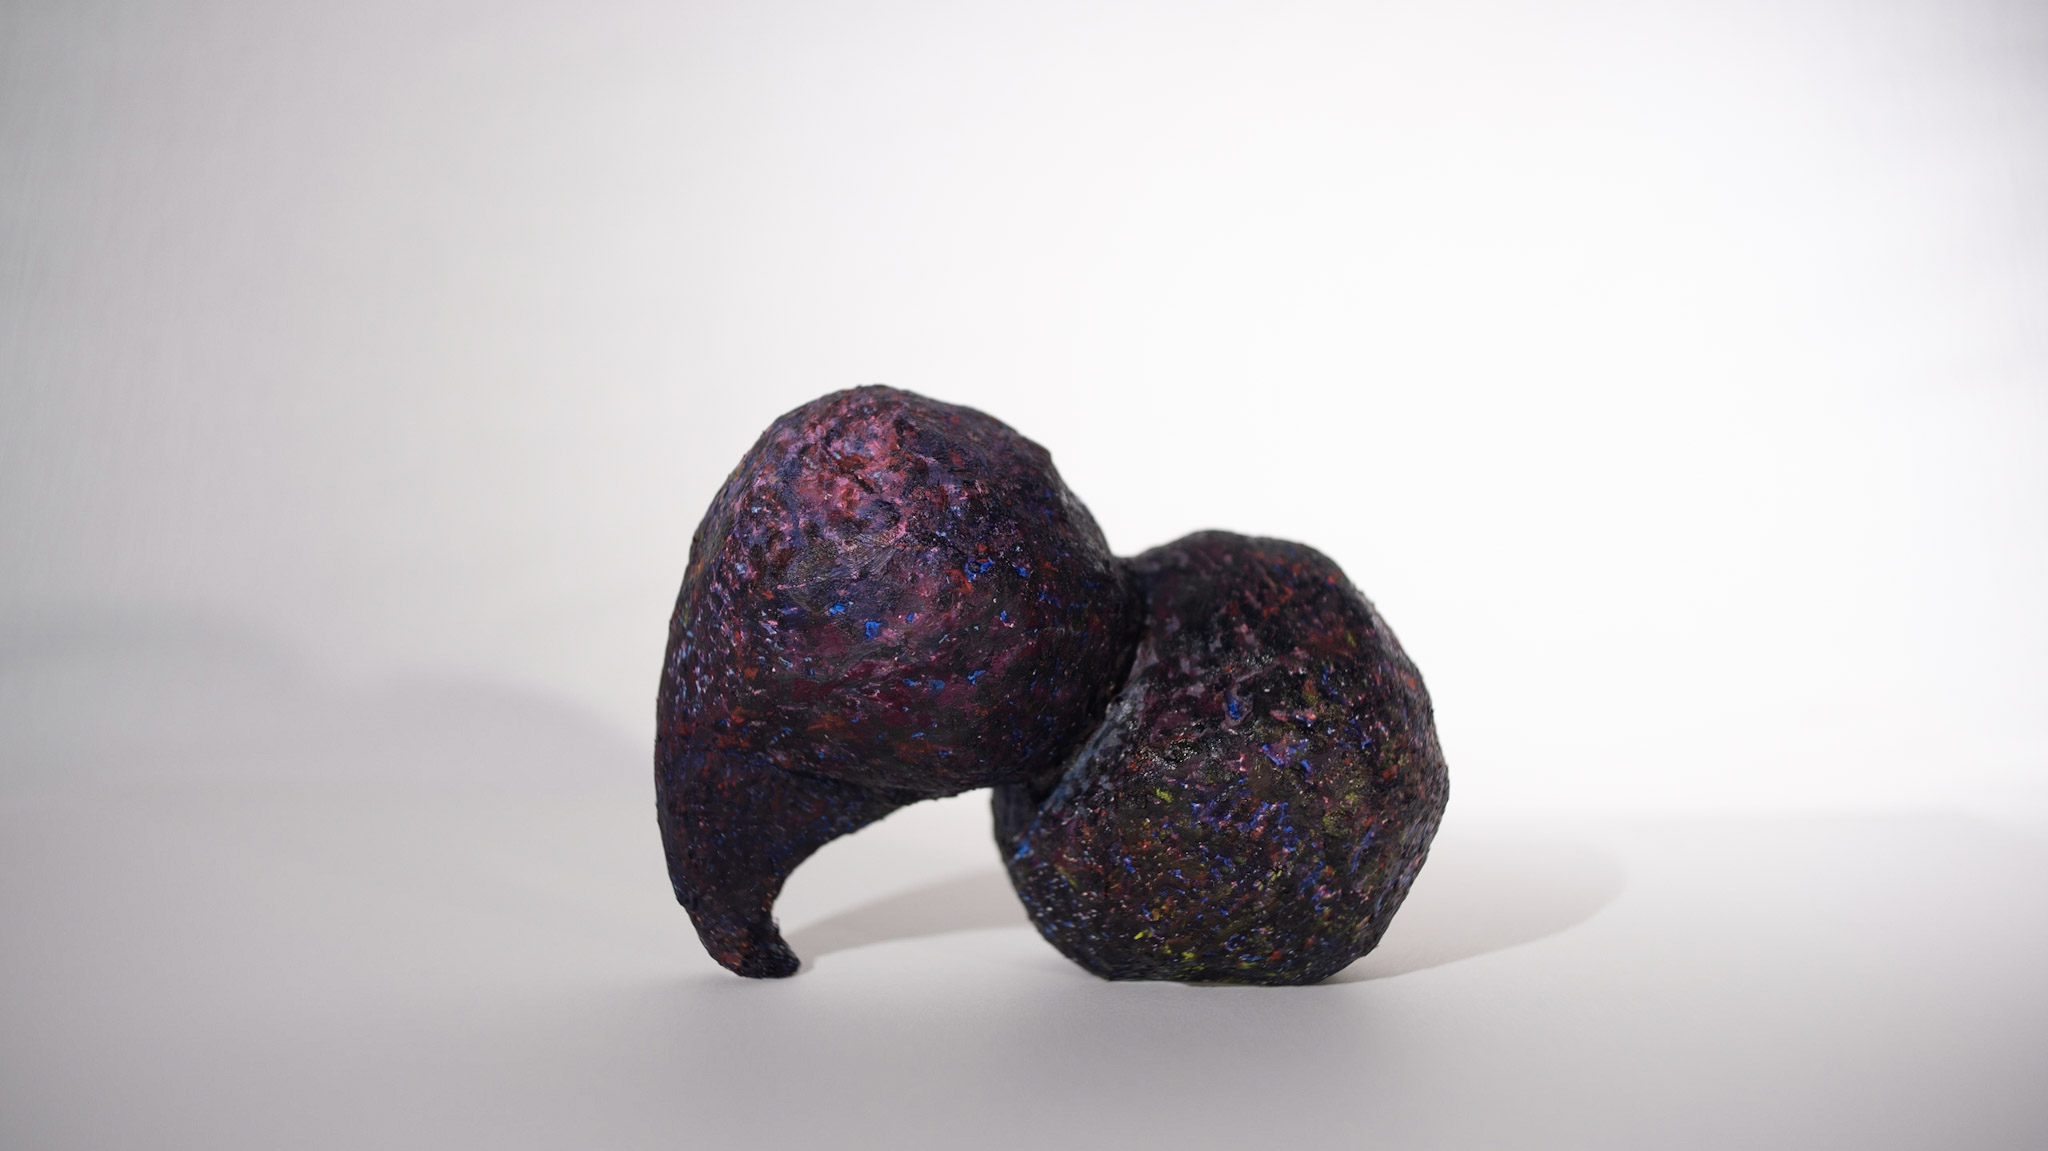 Small plaster sculpture in dark multicolor layers by artist Carrie Ruddick.